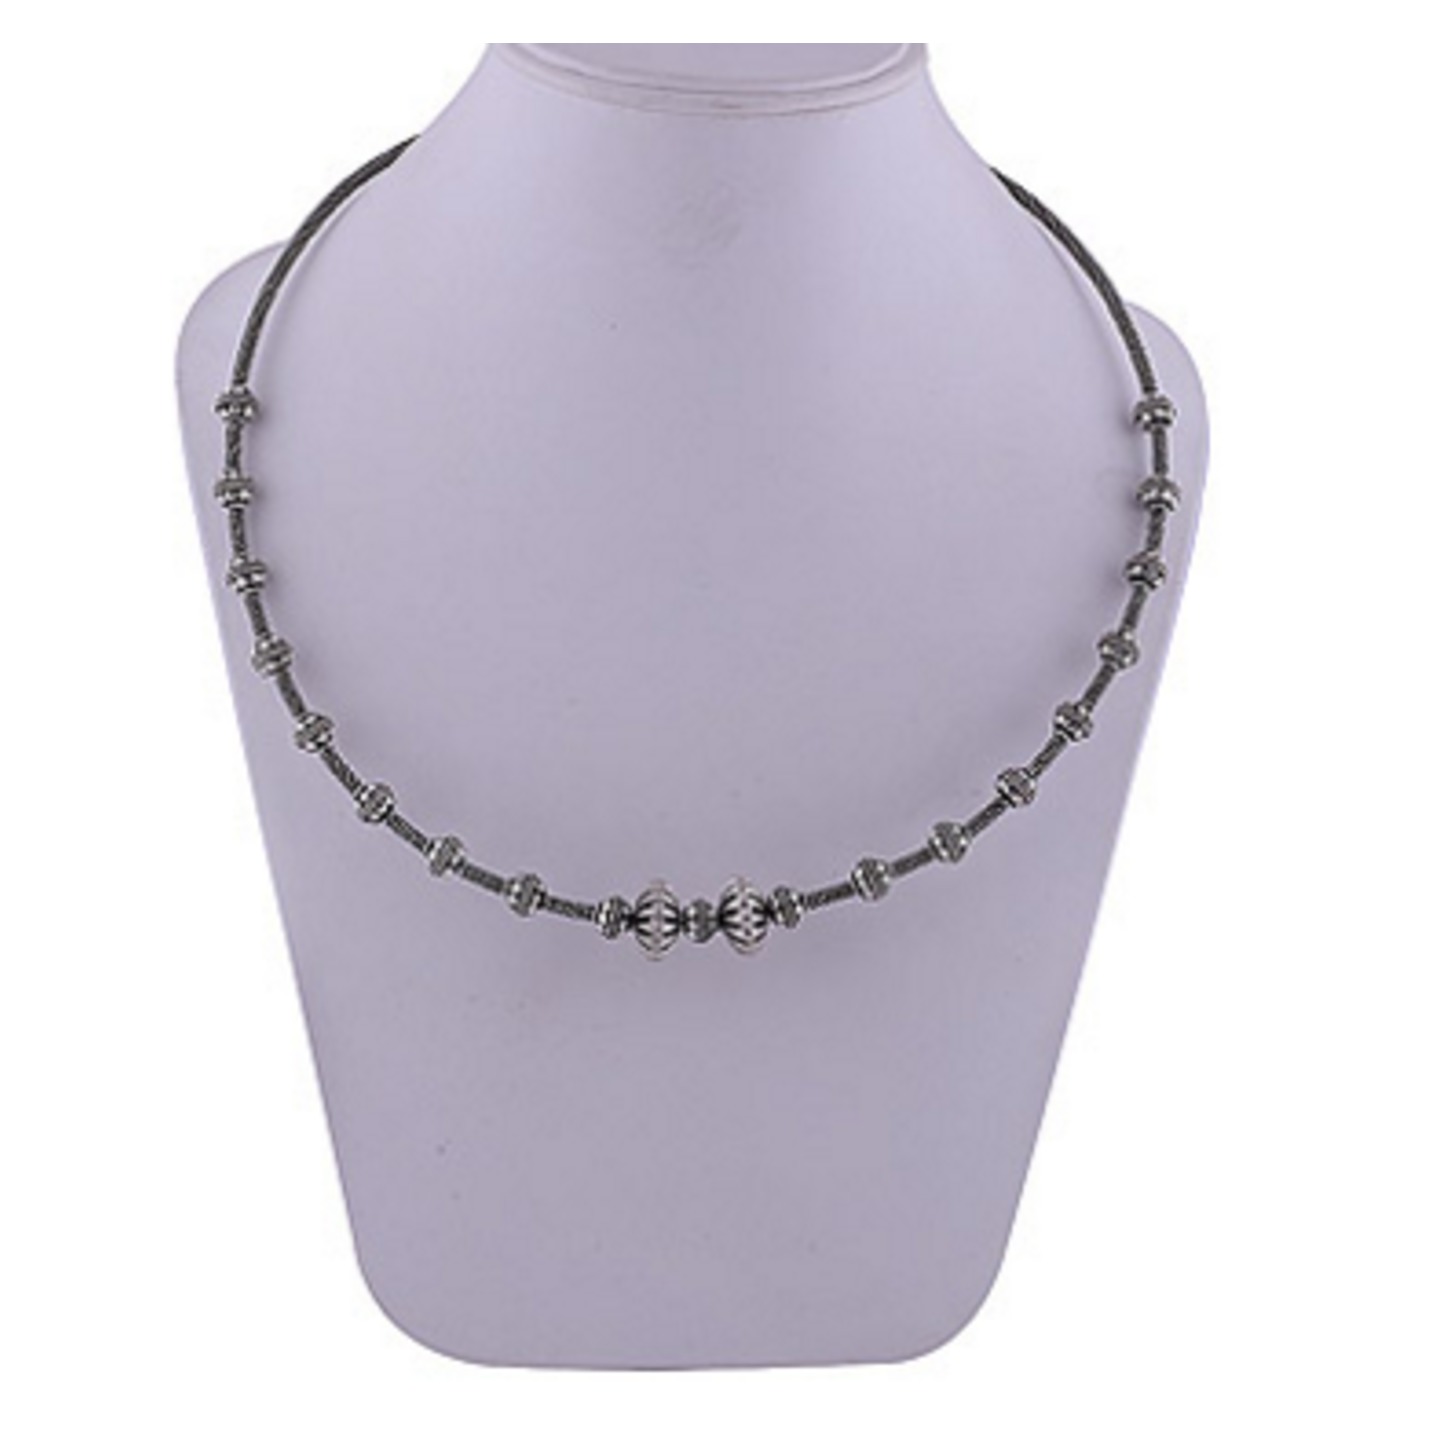 The Party Silver Necklace